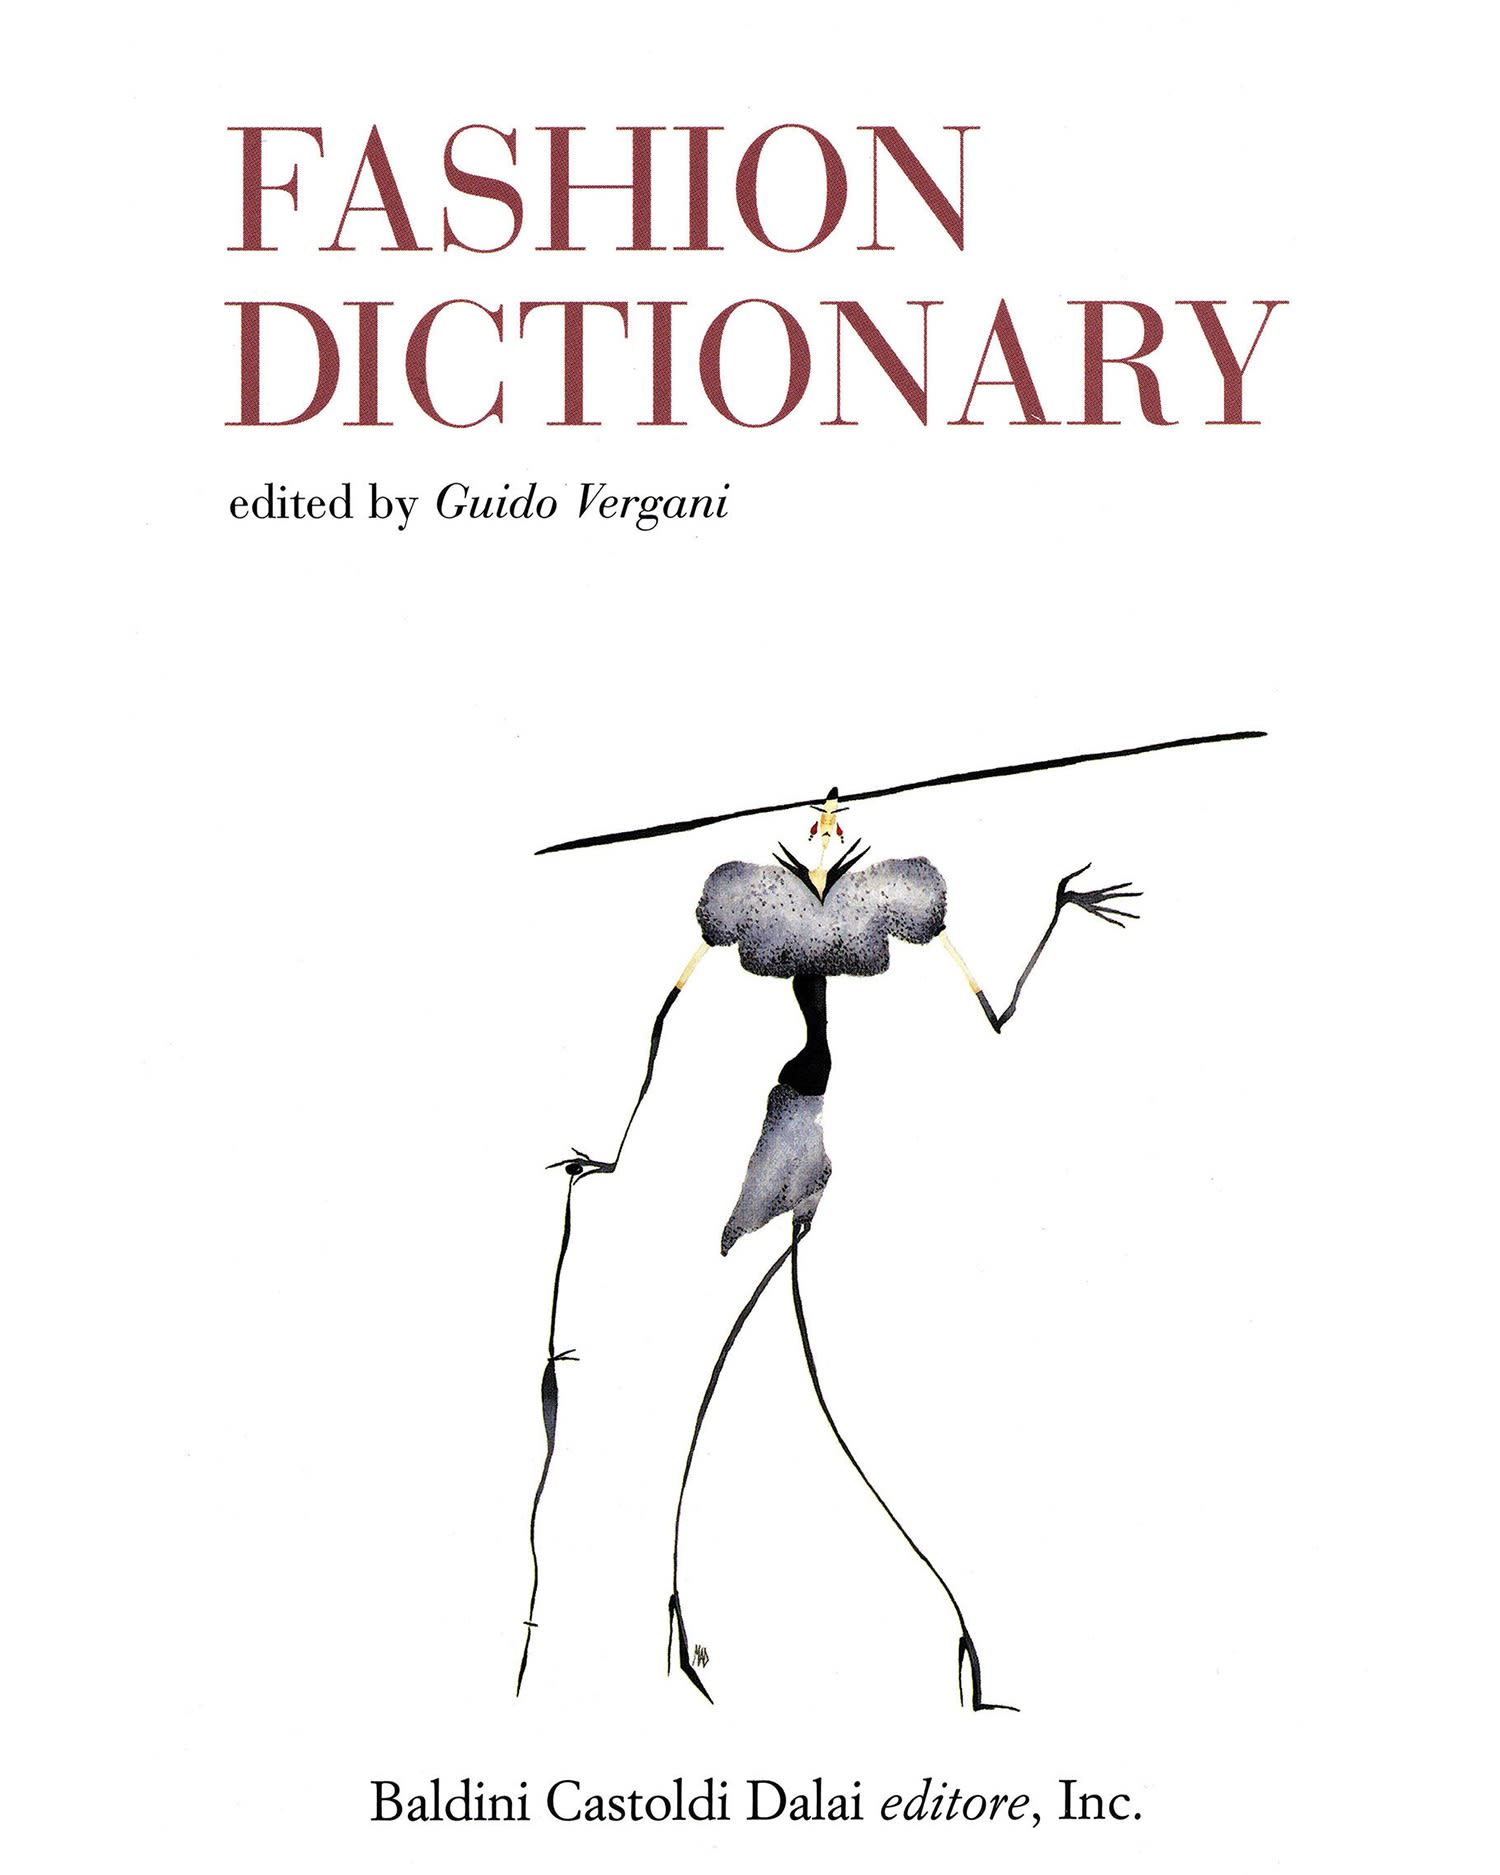 The front cover of the book The Fashion Dictionary. The page has the title in large type along with a small fashion design inspired person and clothing sketch at the bottom. 